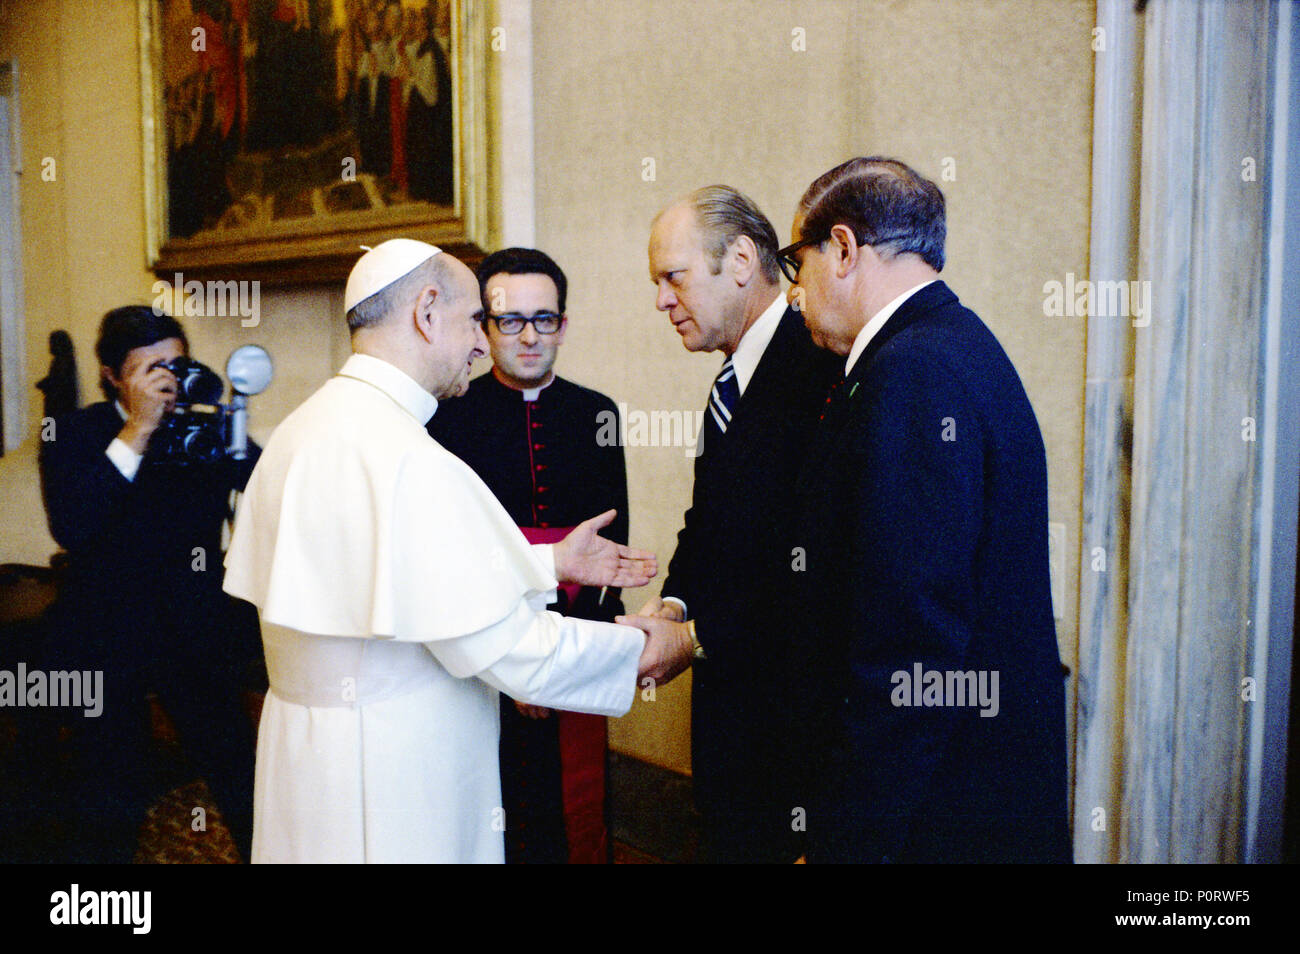 Pope Paul VI greets President Ford in the Vatican’s Papal Library.  Vatican City, Rome, Italy.  June 3, 1975.  Also present is Bishop Jacques Martin. Stock Photo